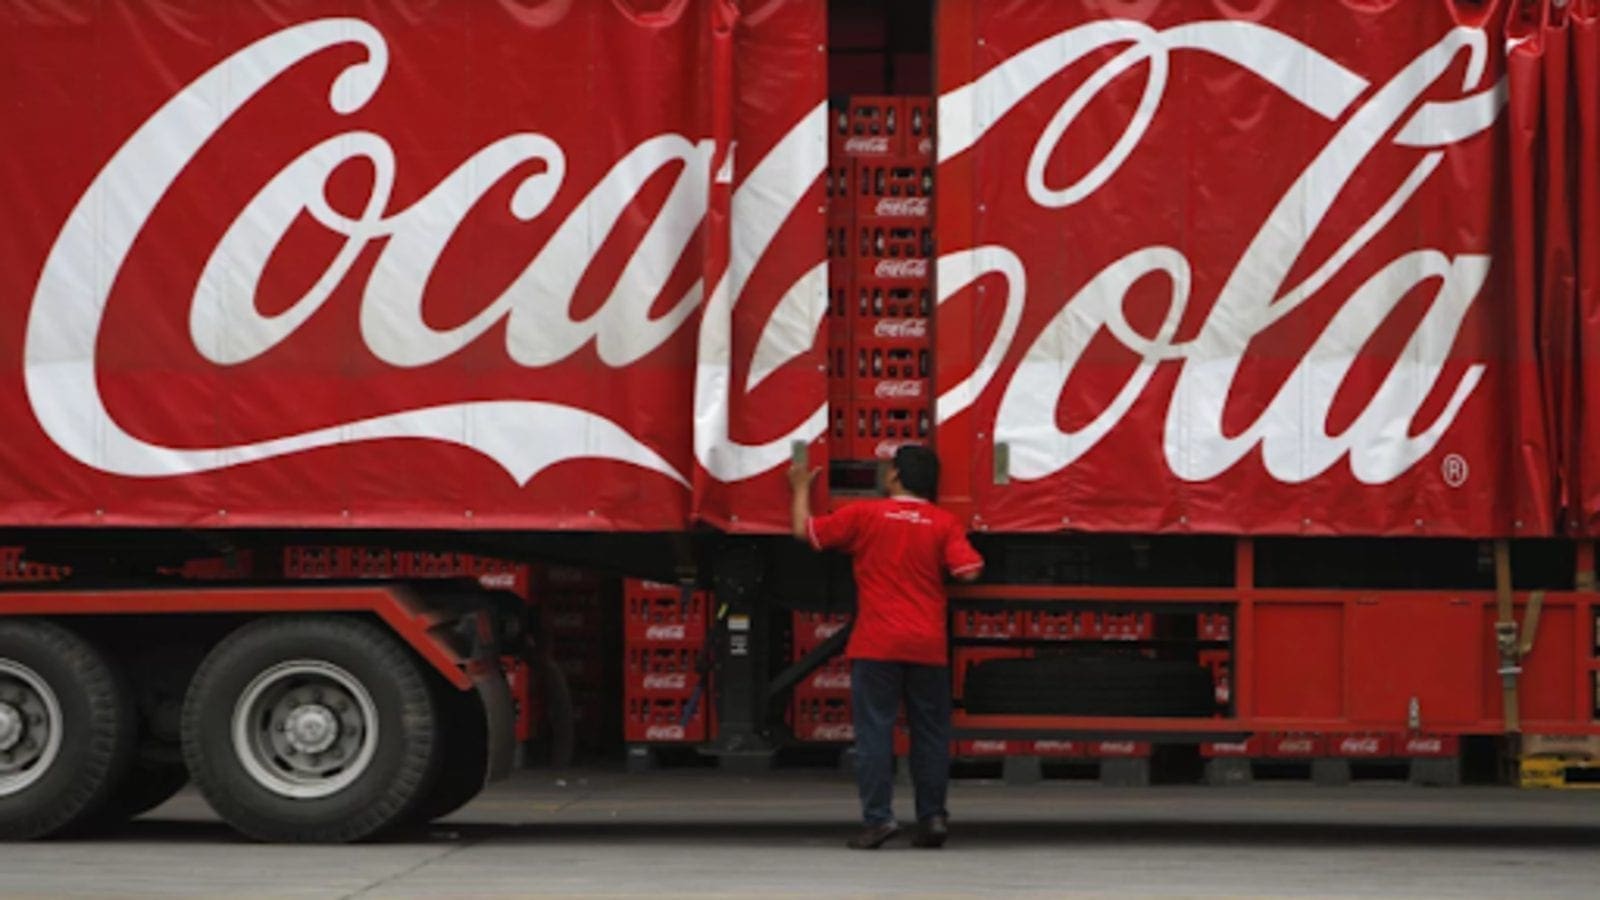 Coca Cola HBC rides on post covid market recovery to record stellar performance in Q3